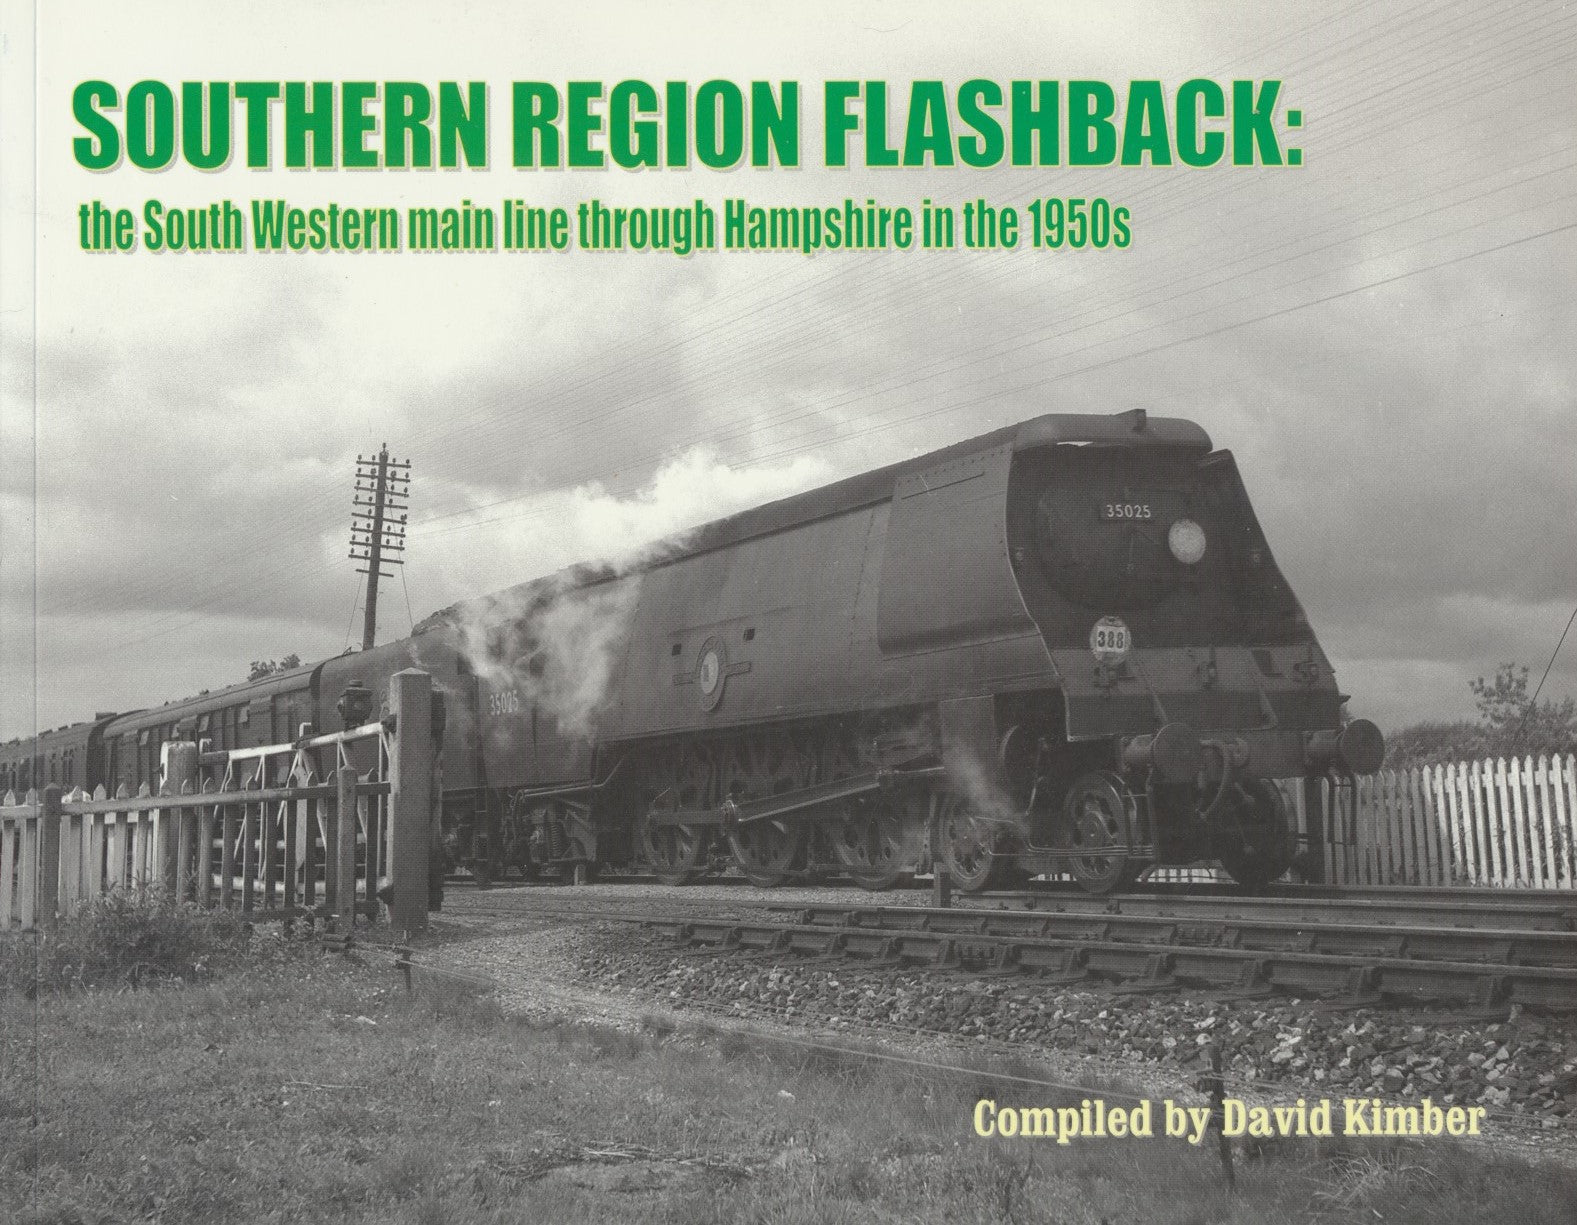 Southern Region Flashback: The South Western Main Line Through Hampshire in the 1950s